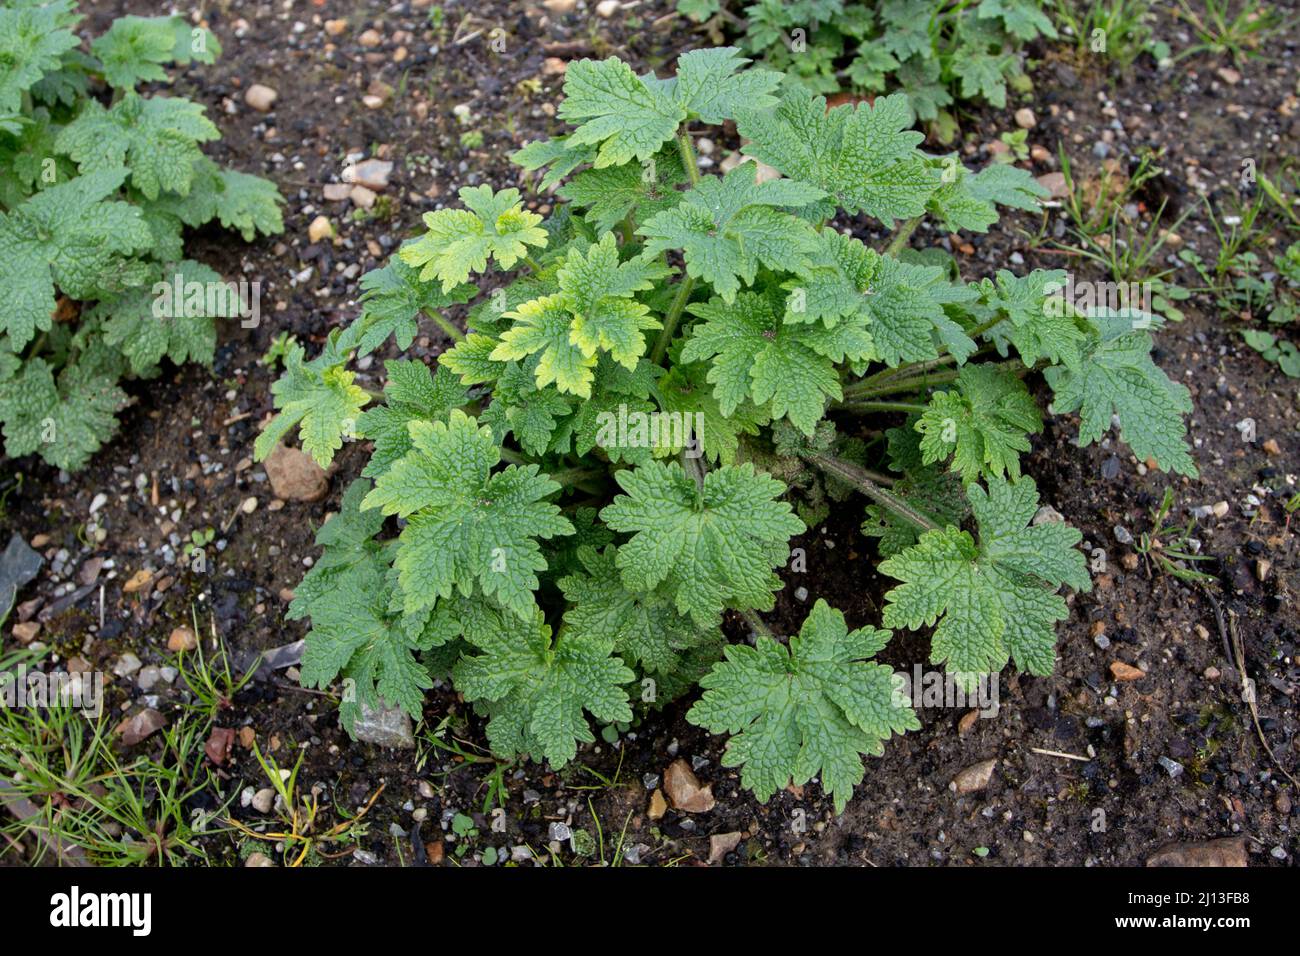 Motherwort or Leonurus cardiaca herbaceous perennial plant in the mint family, Lamiaceae. Throw-wort, lion's ear or lion's tail in the spring. Stock Photo